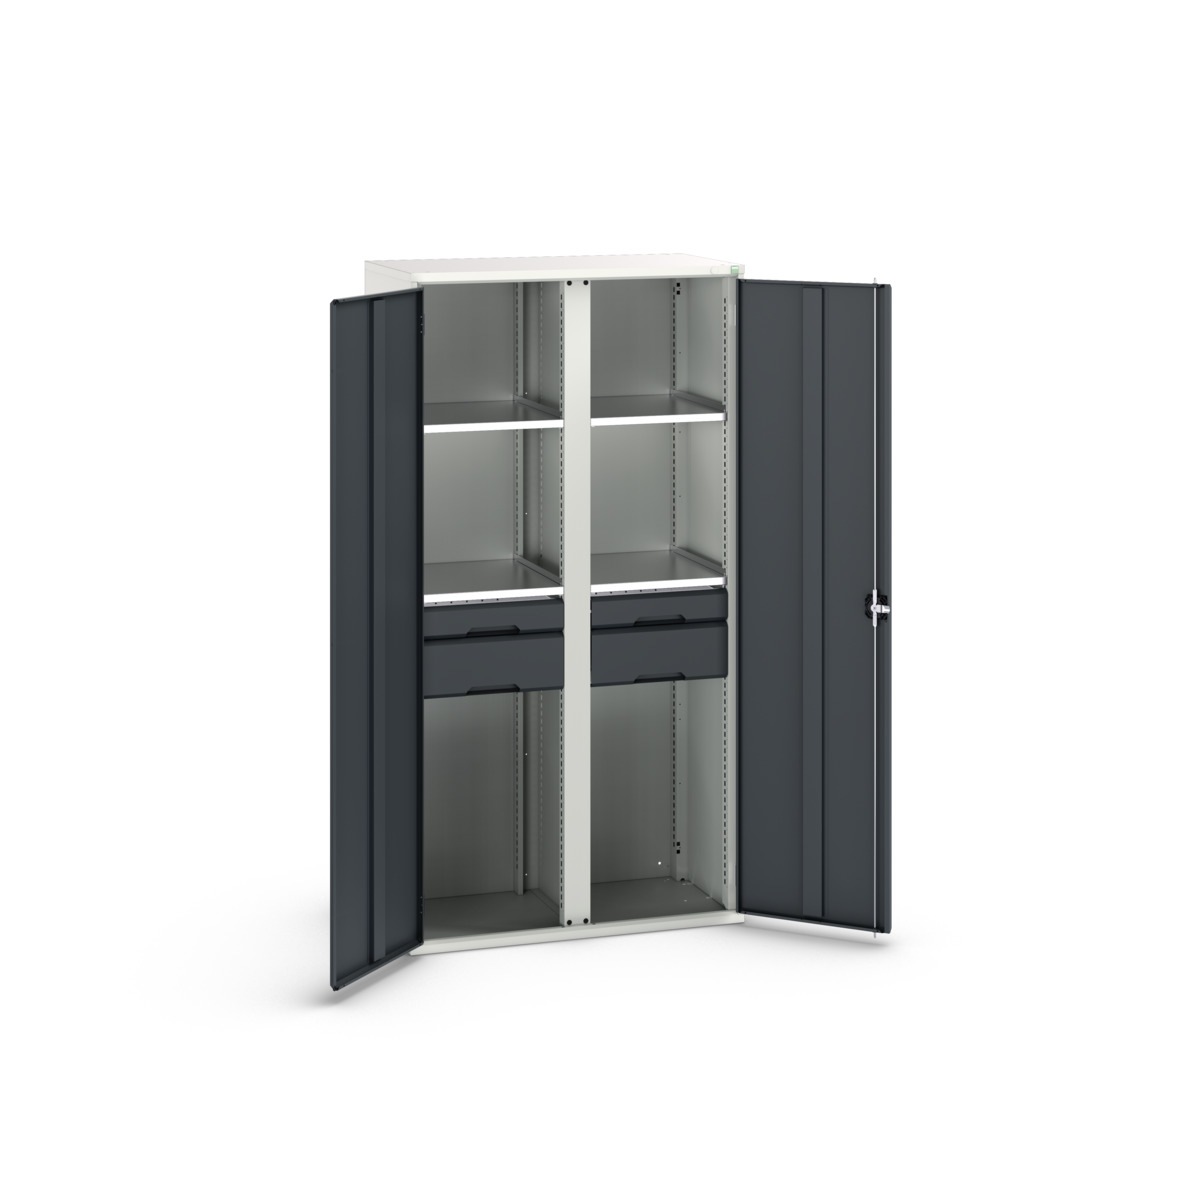 16926582. - verso kitted cupboard